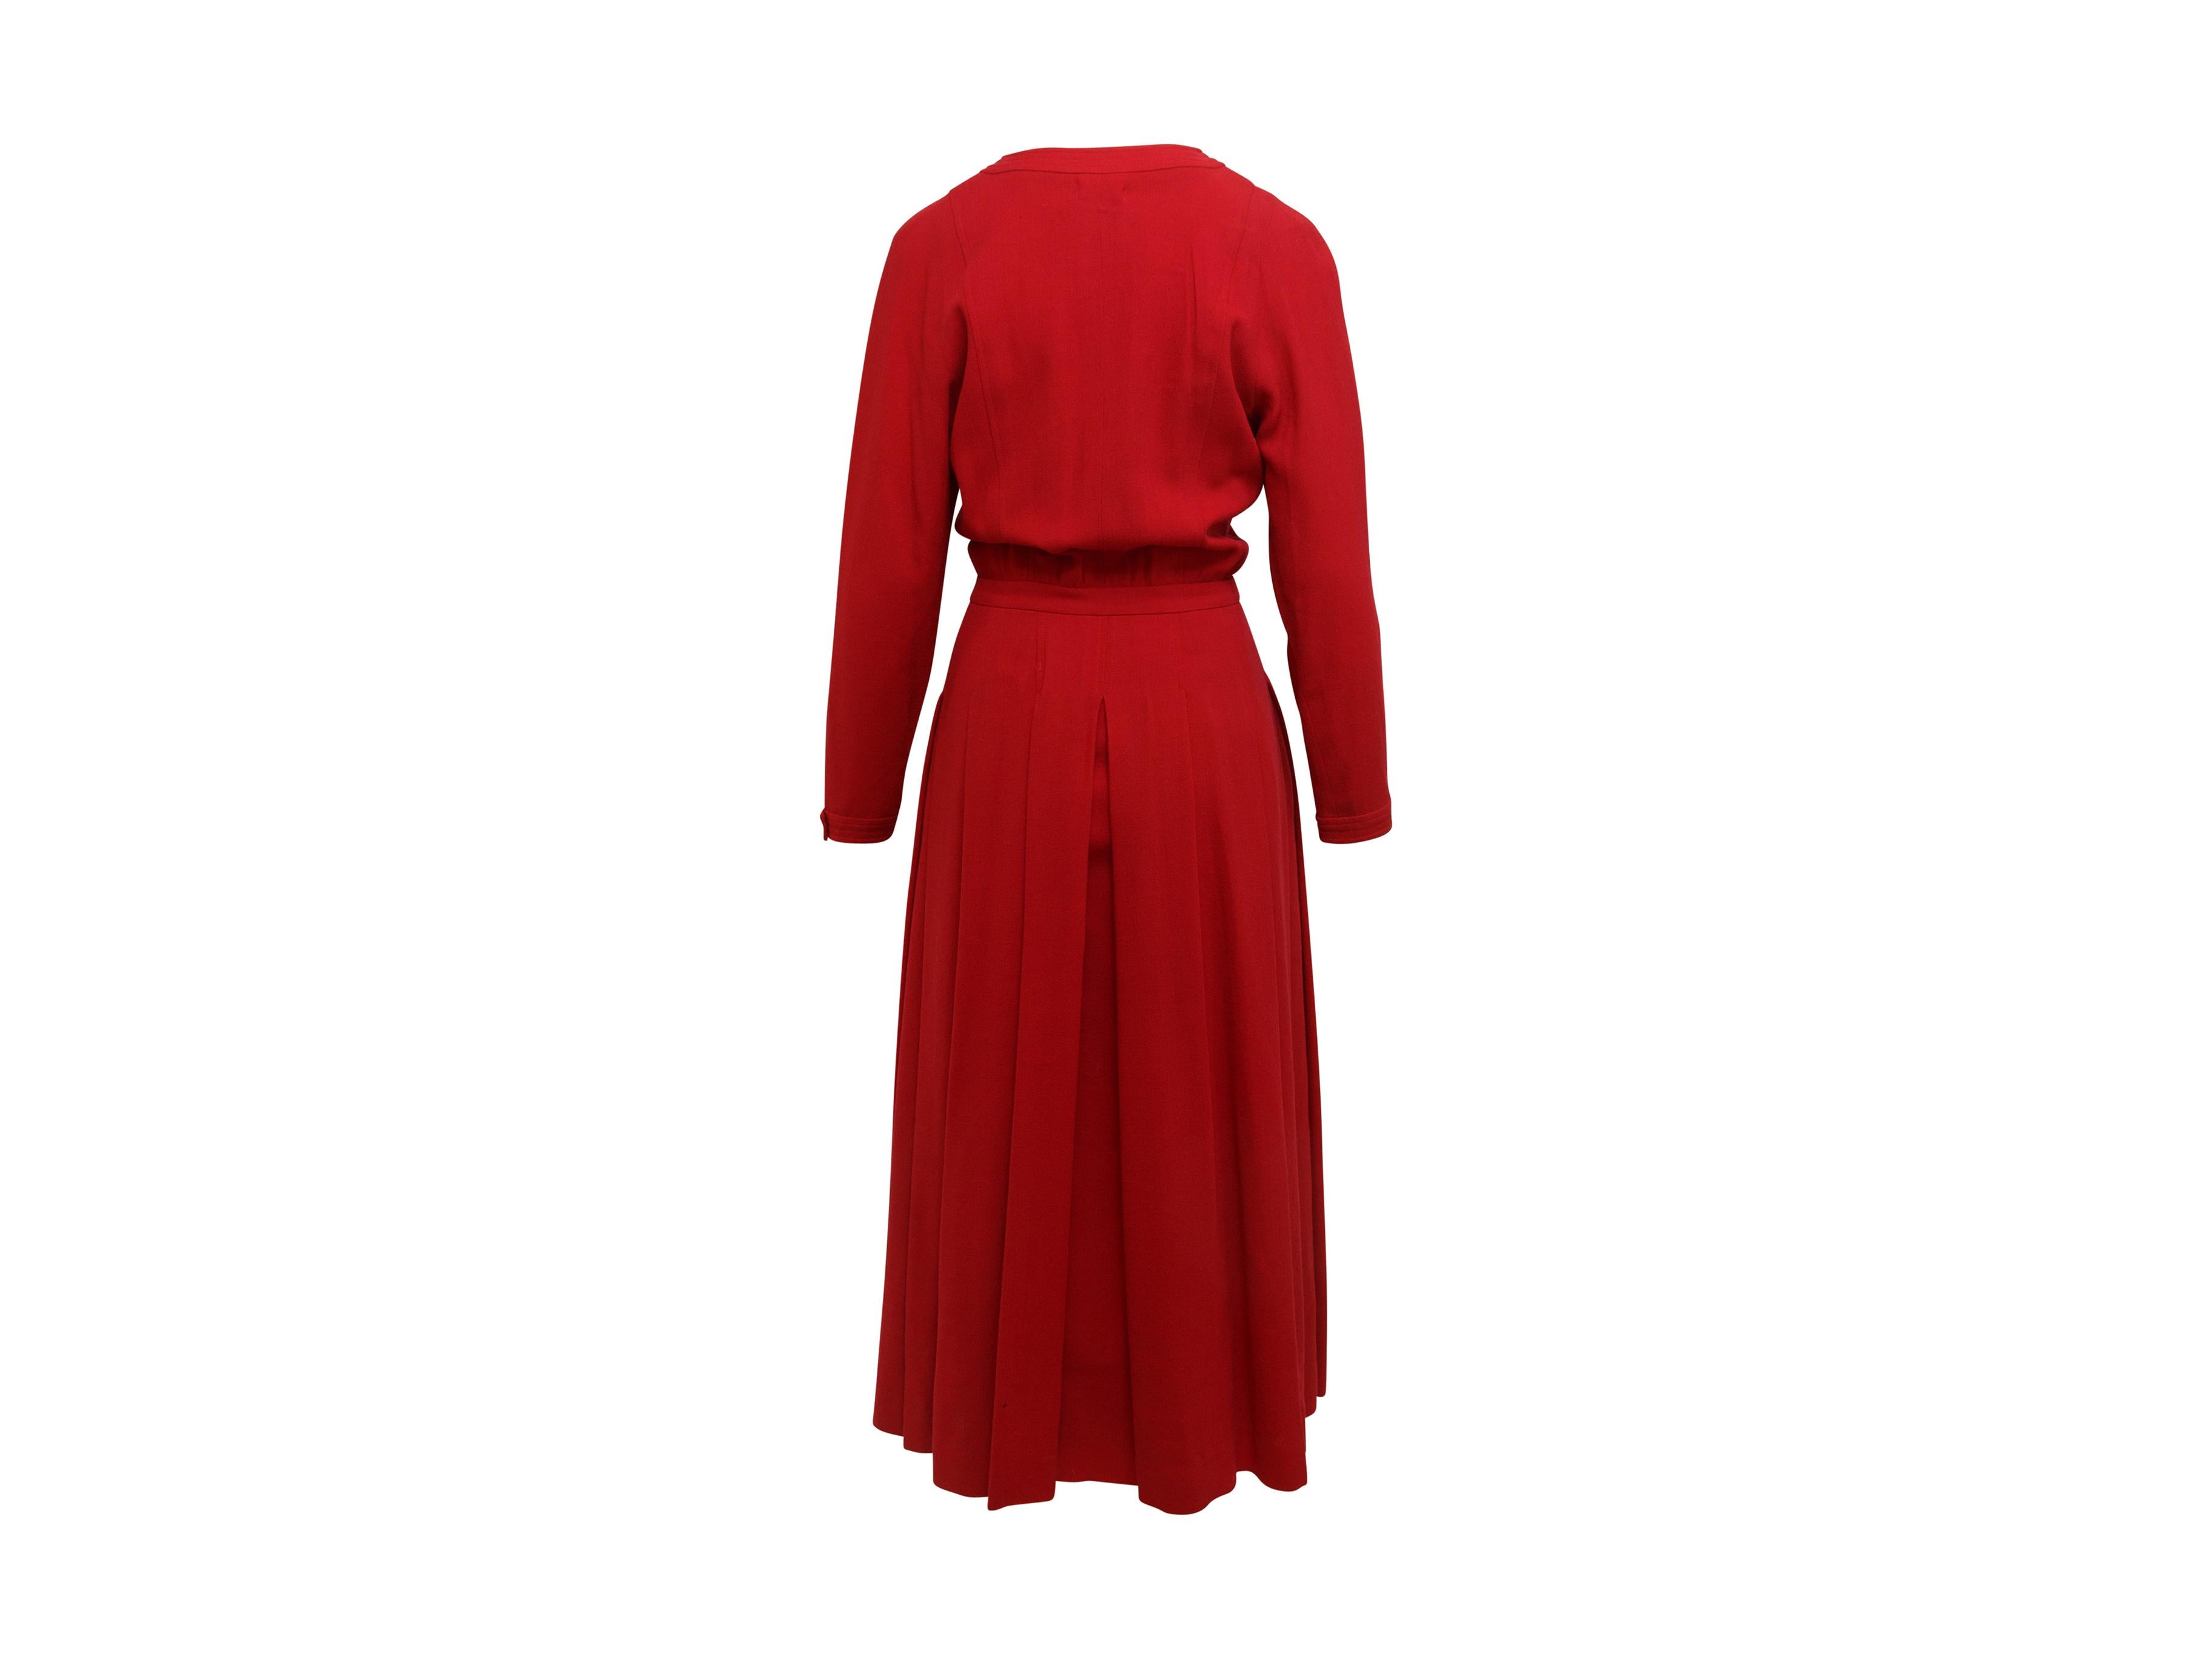 Women's Chanel Red Double-Breasted Dress